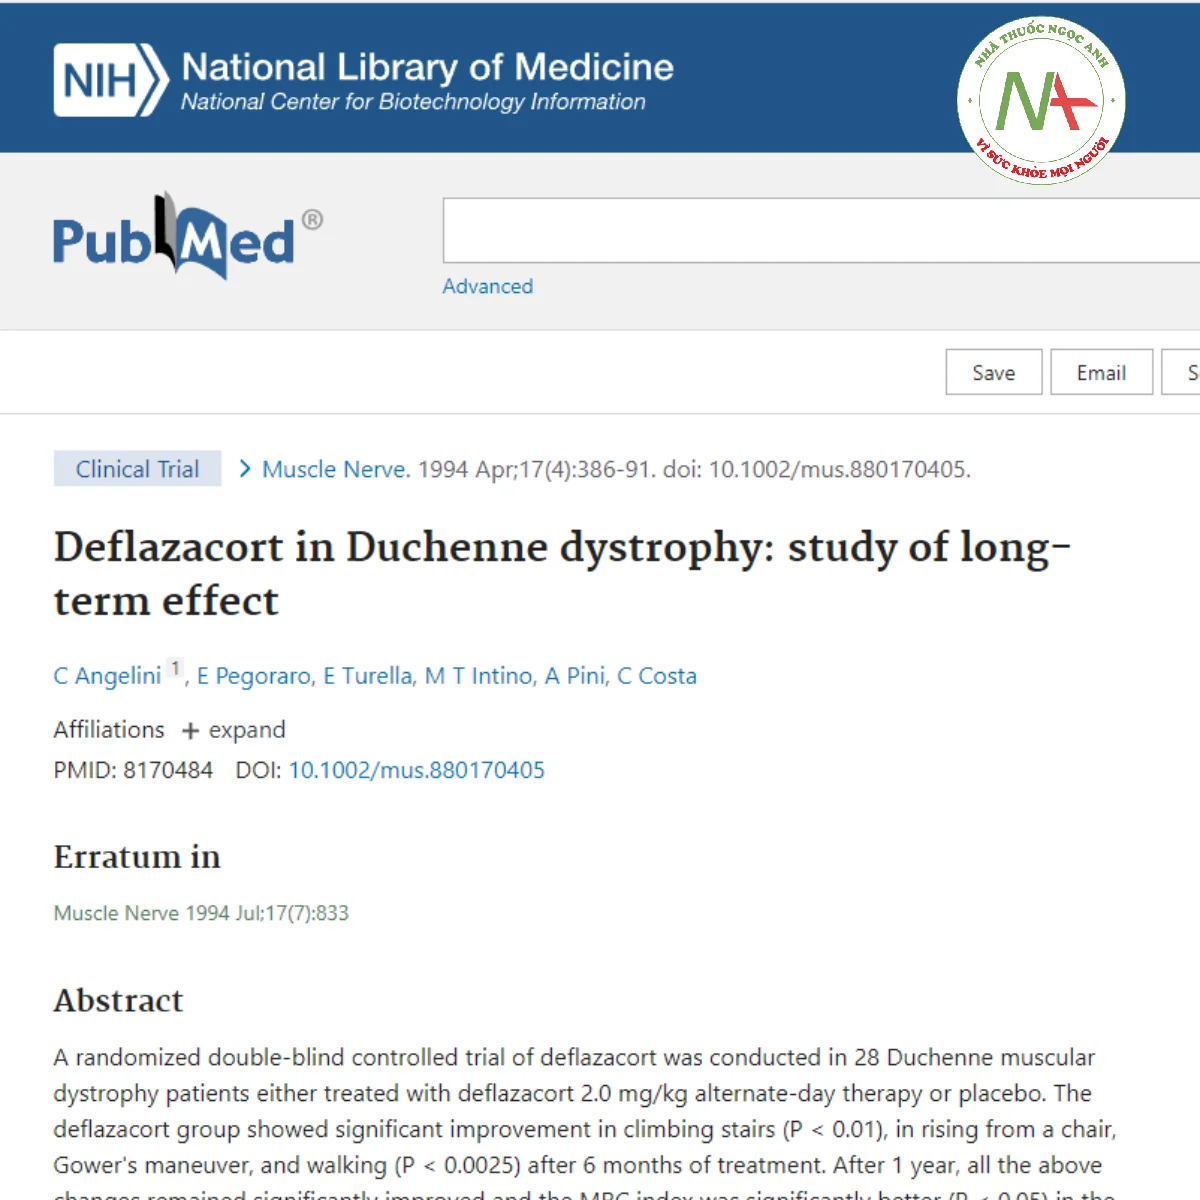 Deflazacort in Duchenne dystrophy_ study of long-term effect